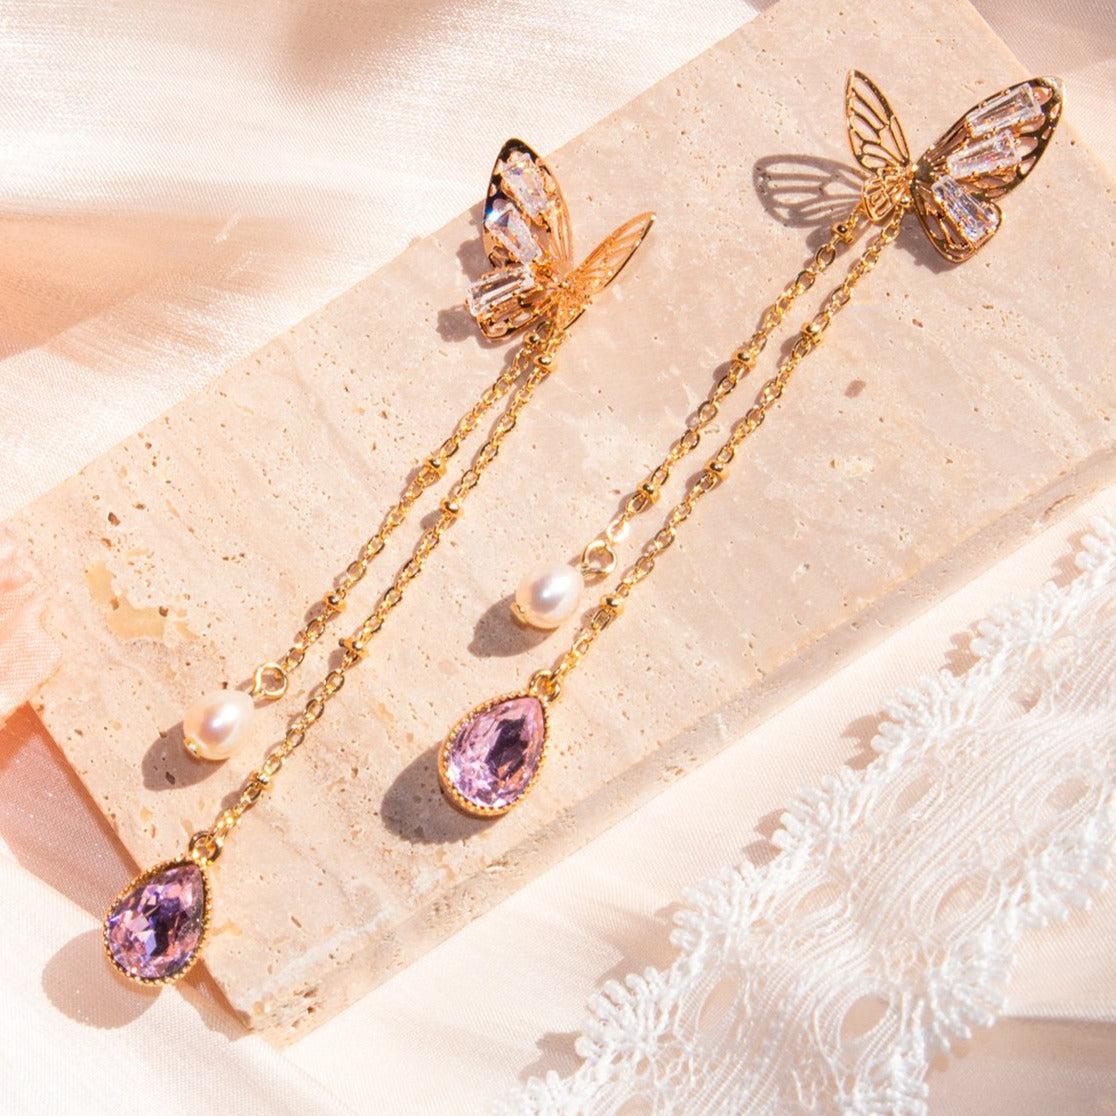 Butterfly Fantasy Earrings | Spring Outfit Accessories | Handmade